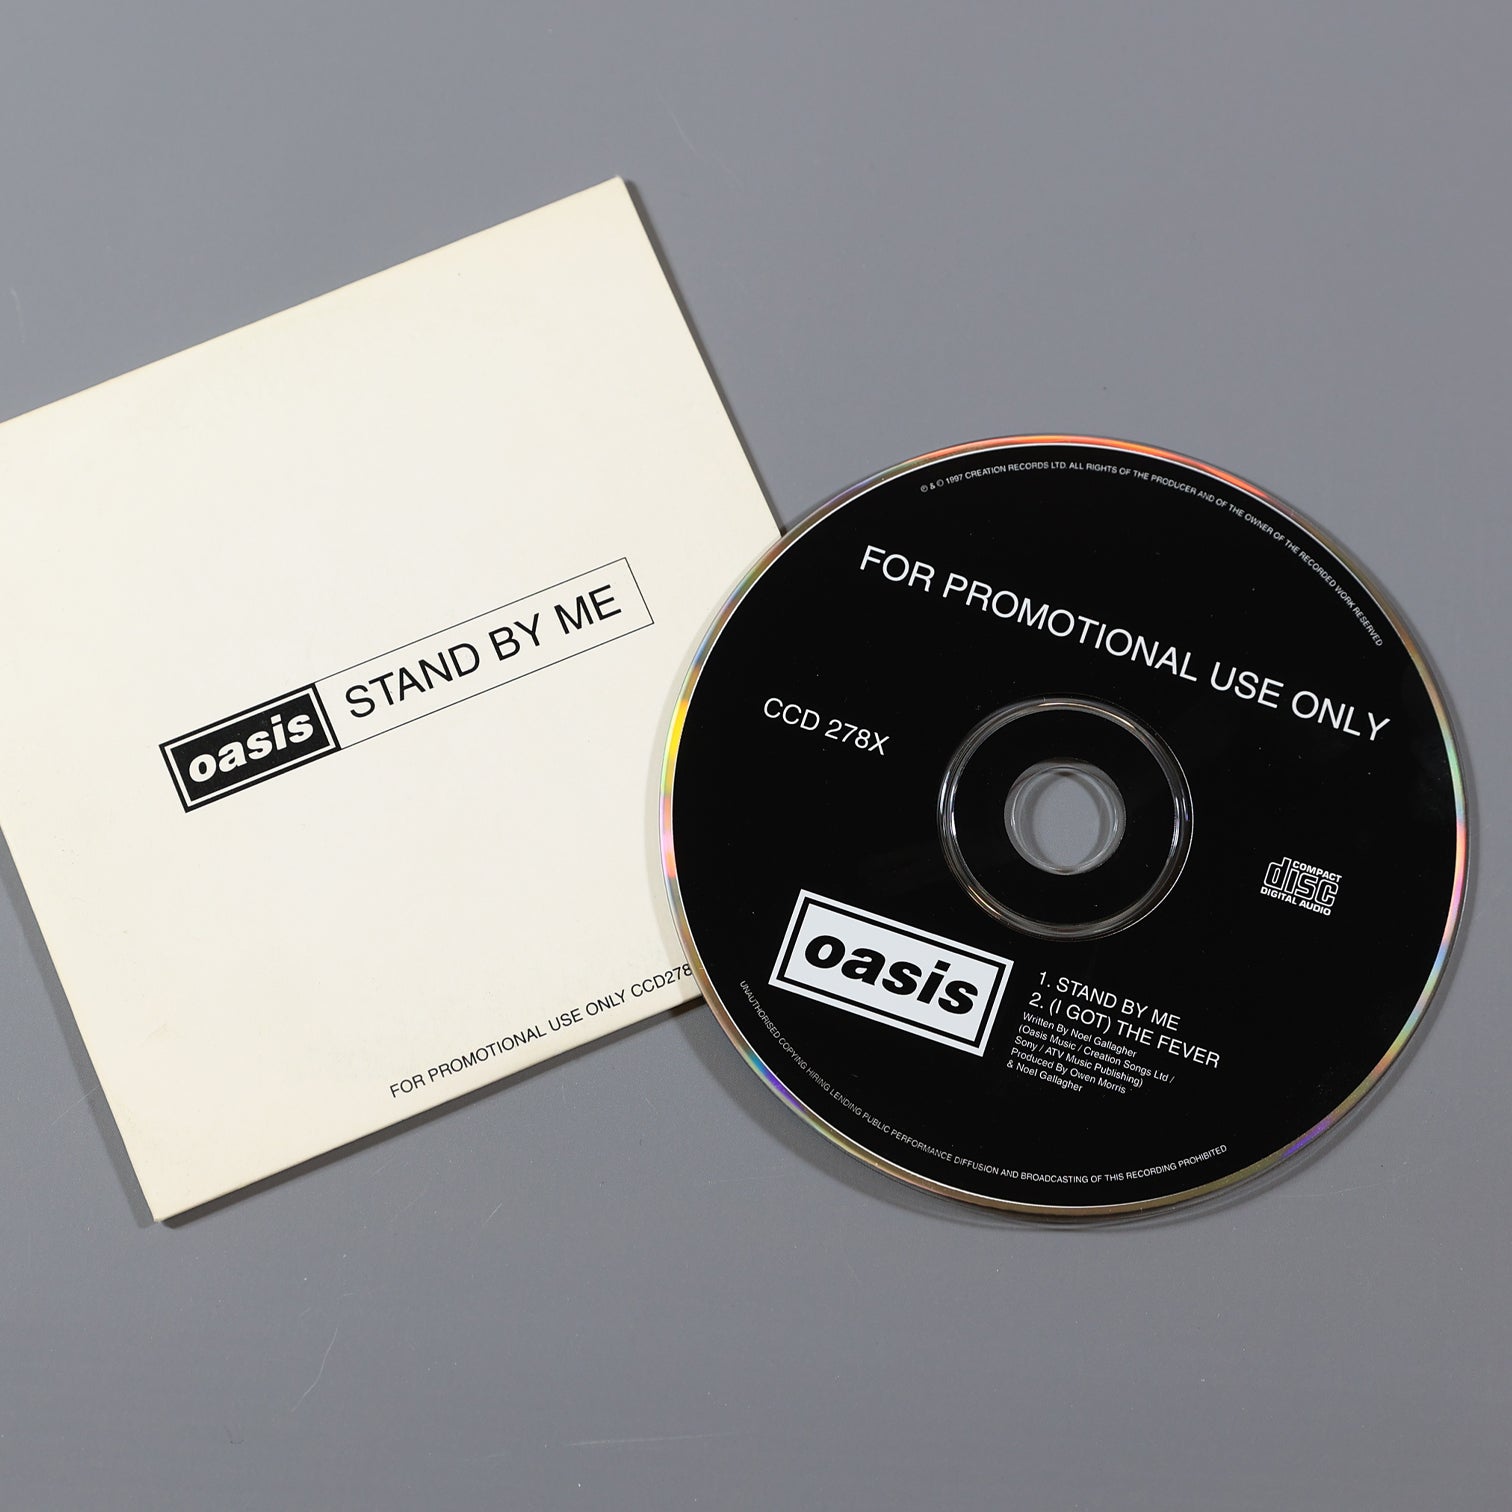 Oasis - Stand By Me Promo CD - New Item